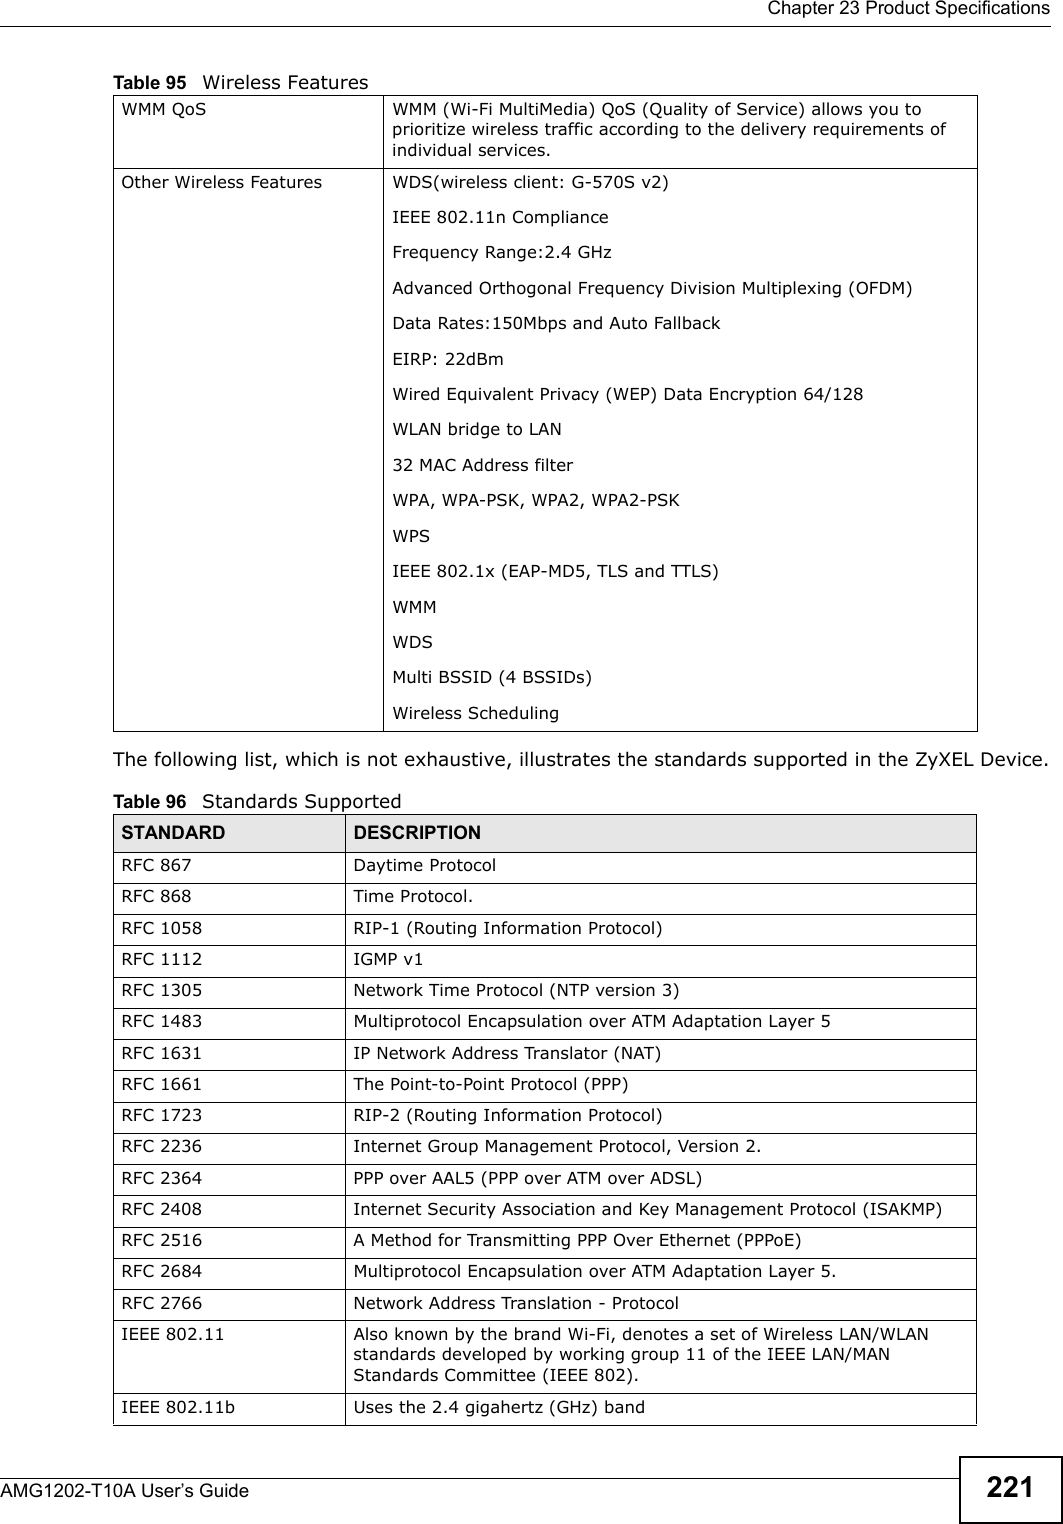  Chapter 23 Product SpecificationsAMG1202-T10A User’s Guide 221The following list, which is not exhaustive, illustrates the standards supported in the ZyXEL Device.WMM QoS  WMM (Wi-Fi MultiMedia) QoS (Quality of Service) allows you to prioritize wireless traffic according to the delivery requirements of individual services.Other Wireless Features WDS(wireless client: G-570S v2)IEEE 802.11n ComplianceFrequency Range:2.4 GHzAdvanced Orthogonal Frequency Division Multiplexing (OFDM)Data Rates:150Mbps and Auto FallbackEIRP: 22dBmWired Equivalent Privacy (WEP) Data Encryption 64/128WLAN bridge to LAN32 MAC Address filterWPA, WPA-PSK, WPA2, WPA2-PSKWPSIEEE 802.1x (EAP-MD5, TLS and TTLS)WMMWDSMulti BSSID (4 BSSIDs)Wireless SchedulingTable 96   Standards Supported STANDARD DESCRIPTIONRFC 867 Daytime ProtocolRFC 868 Time Protocol.RFC 1058 RIP-1 (Routing Information Protocol)RFC 1112 IGMP v1RFC 1305 Network Time Protocol (NTP version 3)RFC 1483 Multiprotocol Encapsulation over ATM Adaptation Layer 5RFC 1631 IP Network Address Translator (NAT)RFC 1661 The Point-to-Point Protocol (PPP)RFC 1723 RIP-2 (Routing Information Protocol)RFC 2236 Internet Group Management Protocol, Version 2.RFC 2364 PPP over AAL5 (PPP over ATM over ADSL)RFC 2408 Internet Security Association and Key Management Protocol (ISAKMP)RFC 2516 A Method for Transmitting PPP Over Ethernet (PPPoE)RFC 2684 Multiprotocol Encapsulation over ATM Adaptation Layer 5.RFC 2766 Network Address Translation - ProtocolIEEE 802.11 Also known by the brand Wi-Fi, denotes a set of Wireless LAN/WLAN standards developed by working group 11 of the IEEE LAN/MAN Standards Committee (IEEE 802).IEEE 802.11b Uses the 2.4 gigahertz (GHz) bandTable 95   Wireless Features